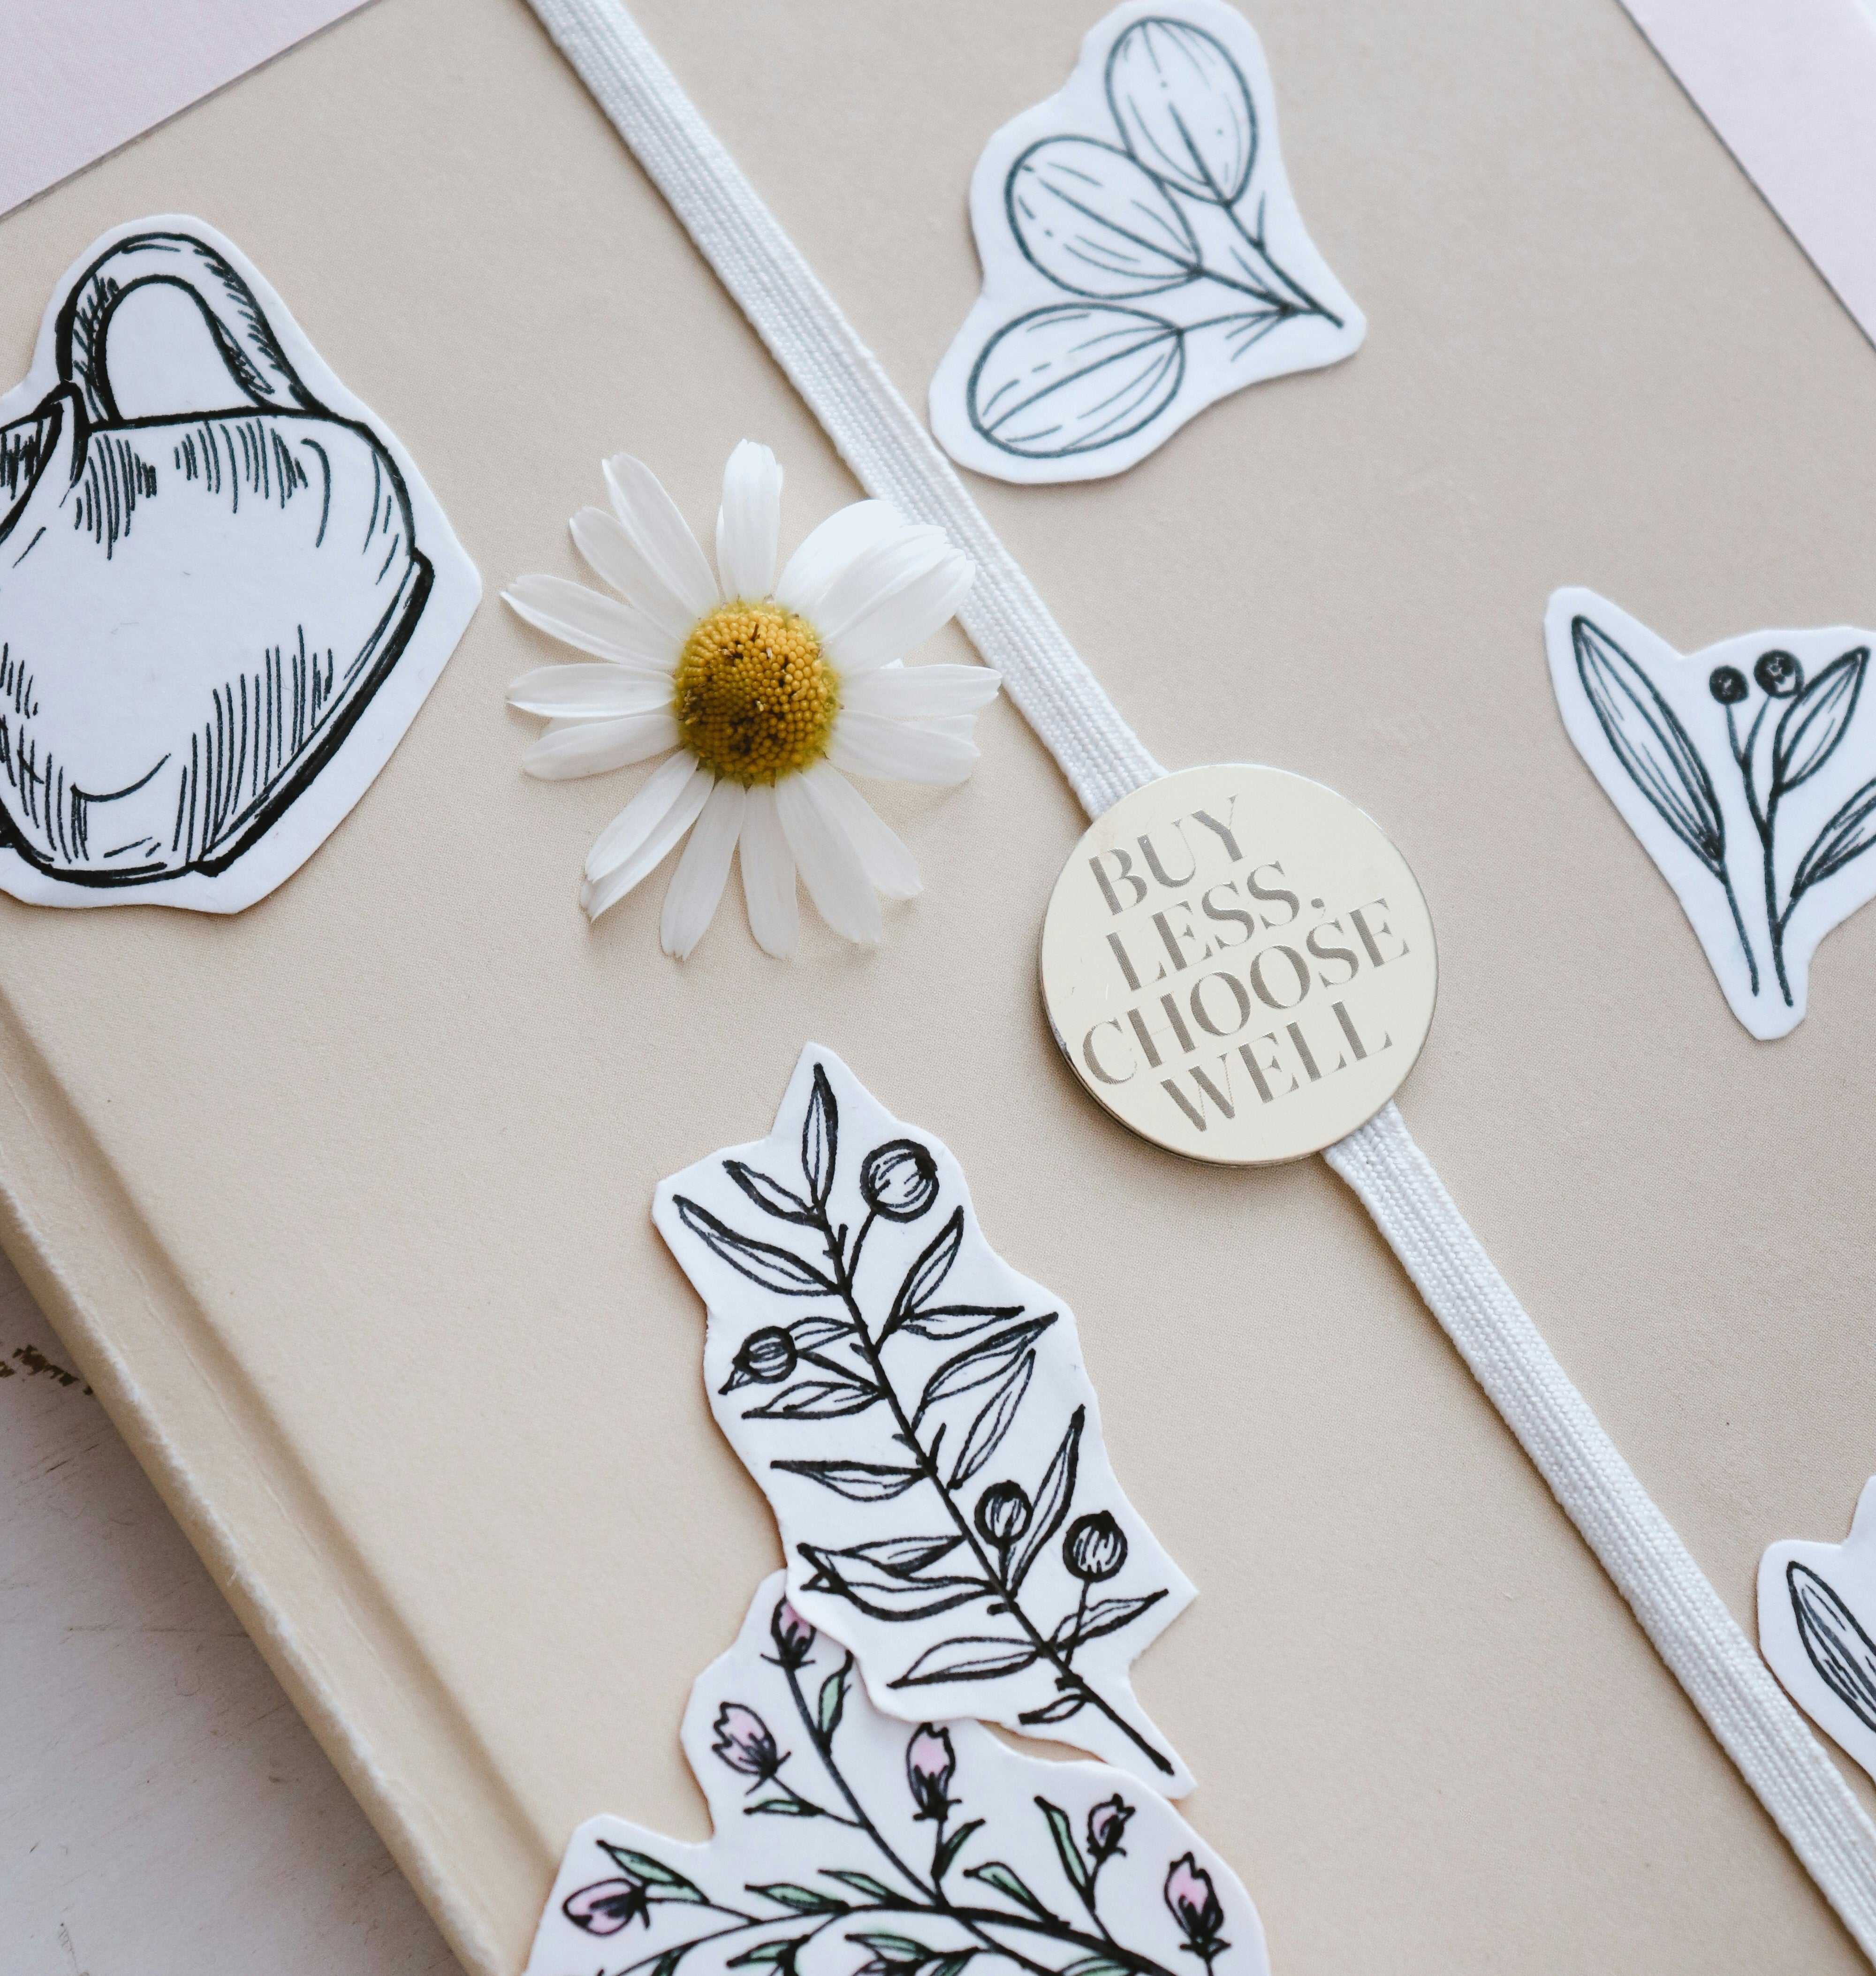 Journal with stickers and a flower